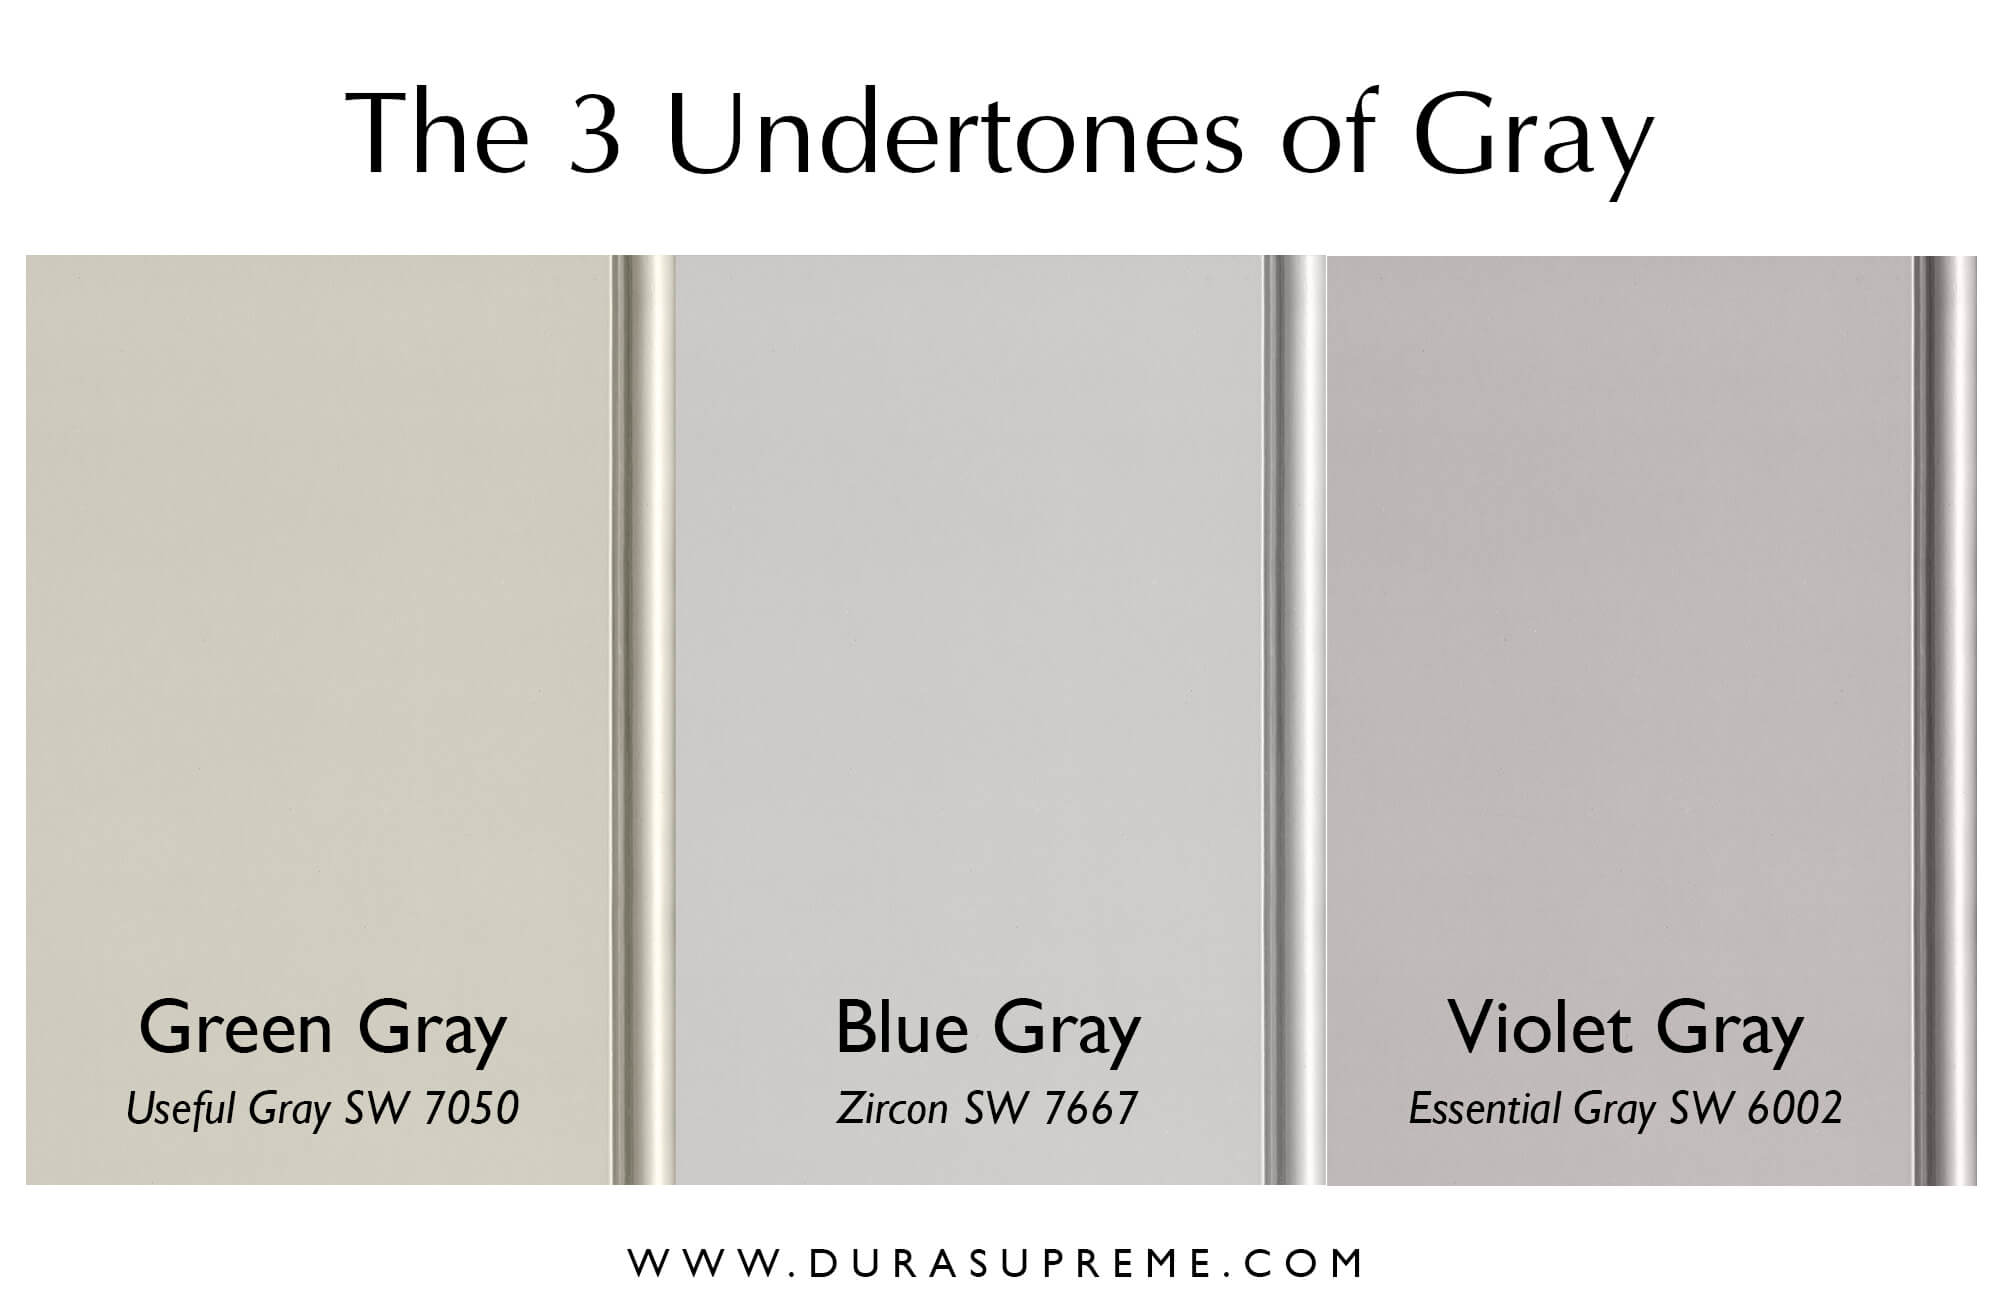 The 3 Undertones of the color Gray, green-gray, blue-gray, and violet-gray. Featuring Useful Gray Sw7050, Xircon SW7667, and Essential Gray Sw6022 by Sherwin-Williams.